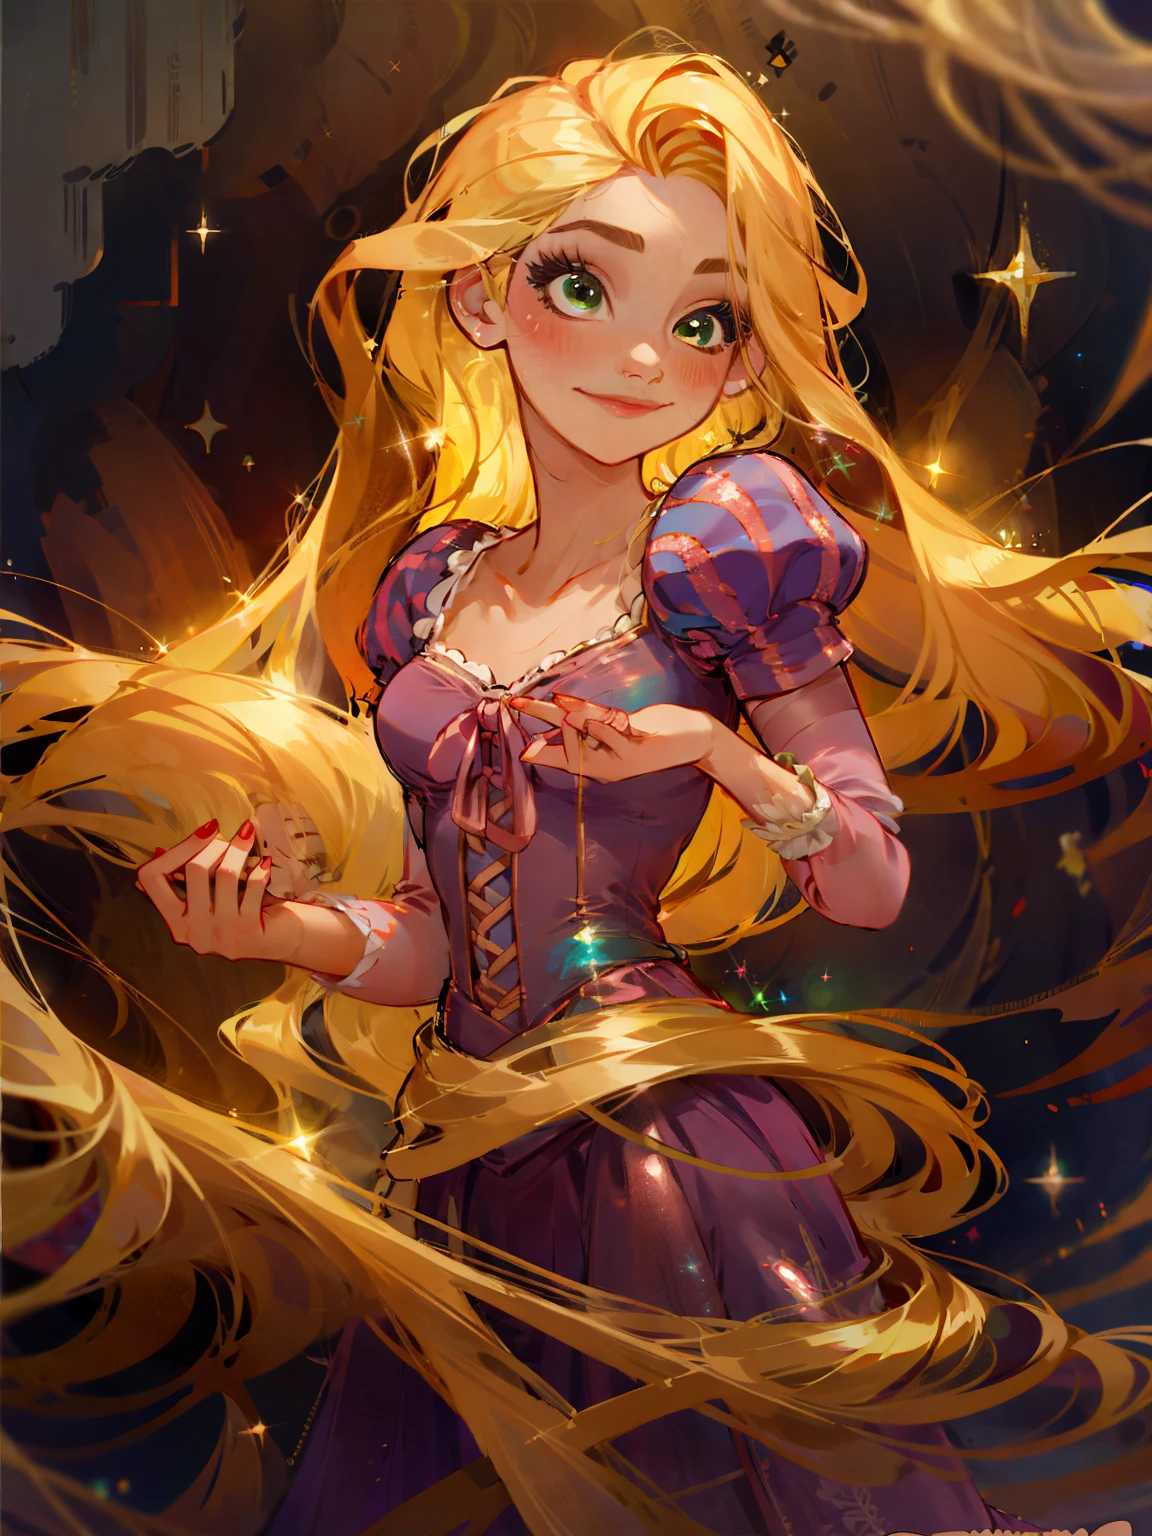 bioluminescent shiny glow, beautiful girl in flowing ballgown dress, galaxy style dress, galaxy glow, sparkling, ethereal, fluffy flowing hair, silky glistening iridescent ash hair, 